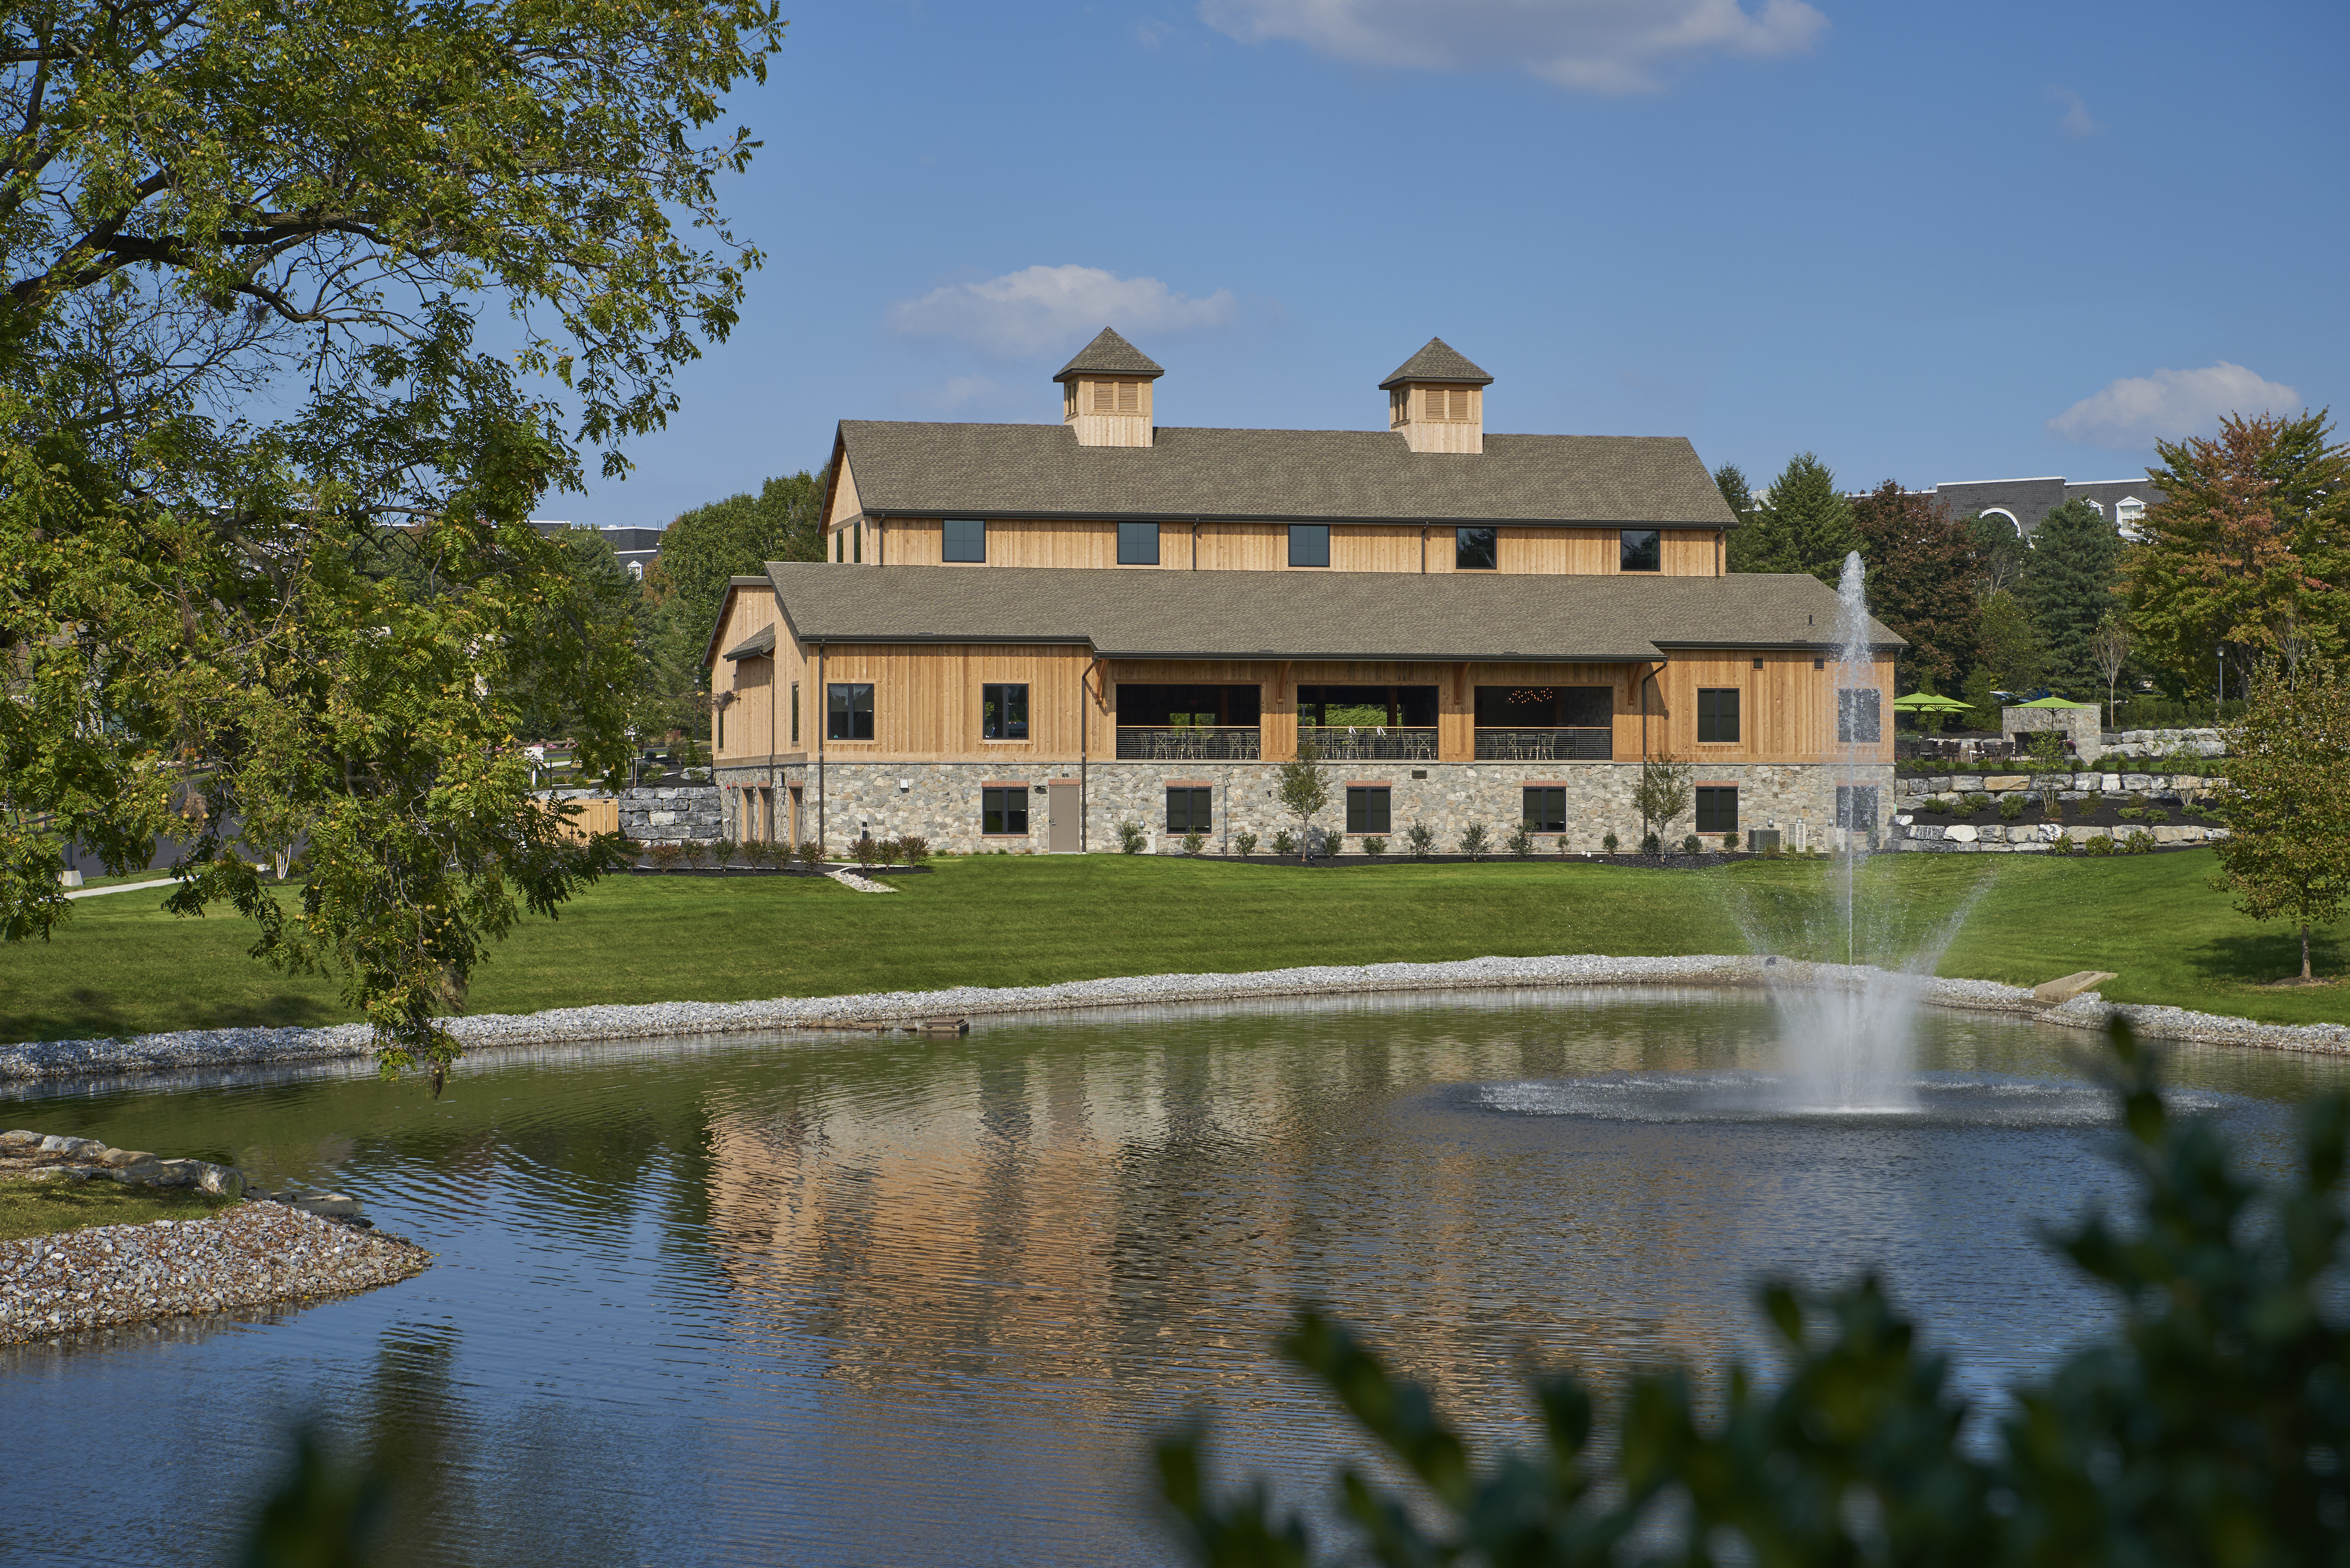 Chautauqua Hall Event Building Across The Pond At Willow Valley Communities